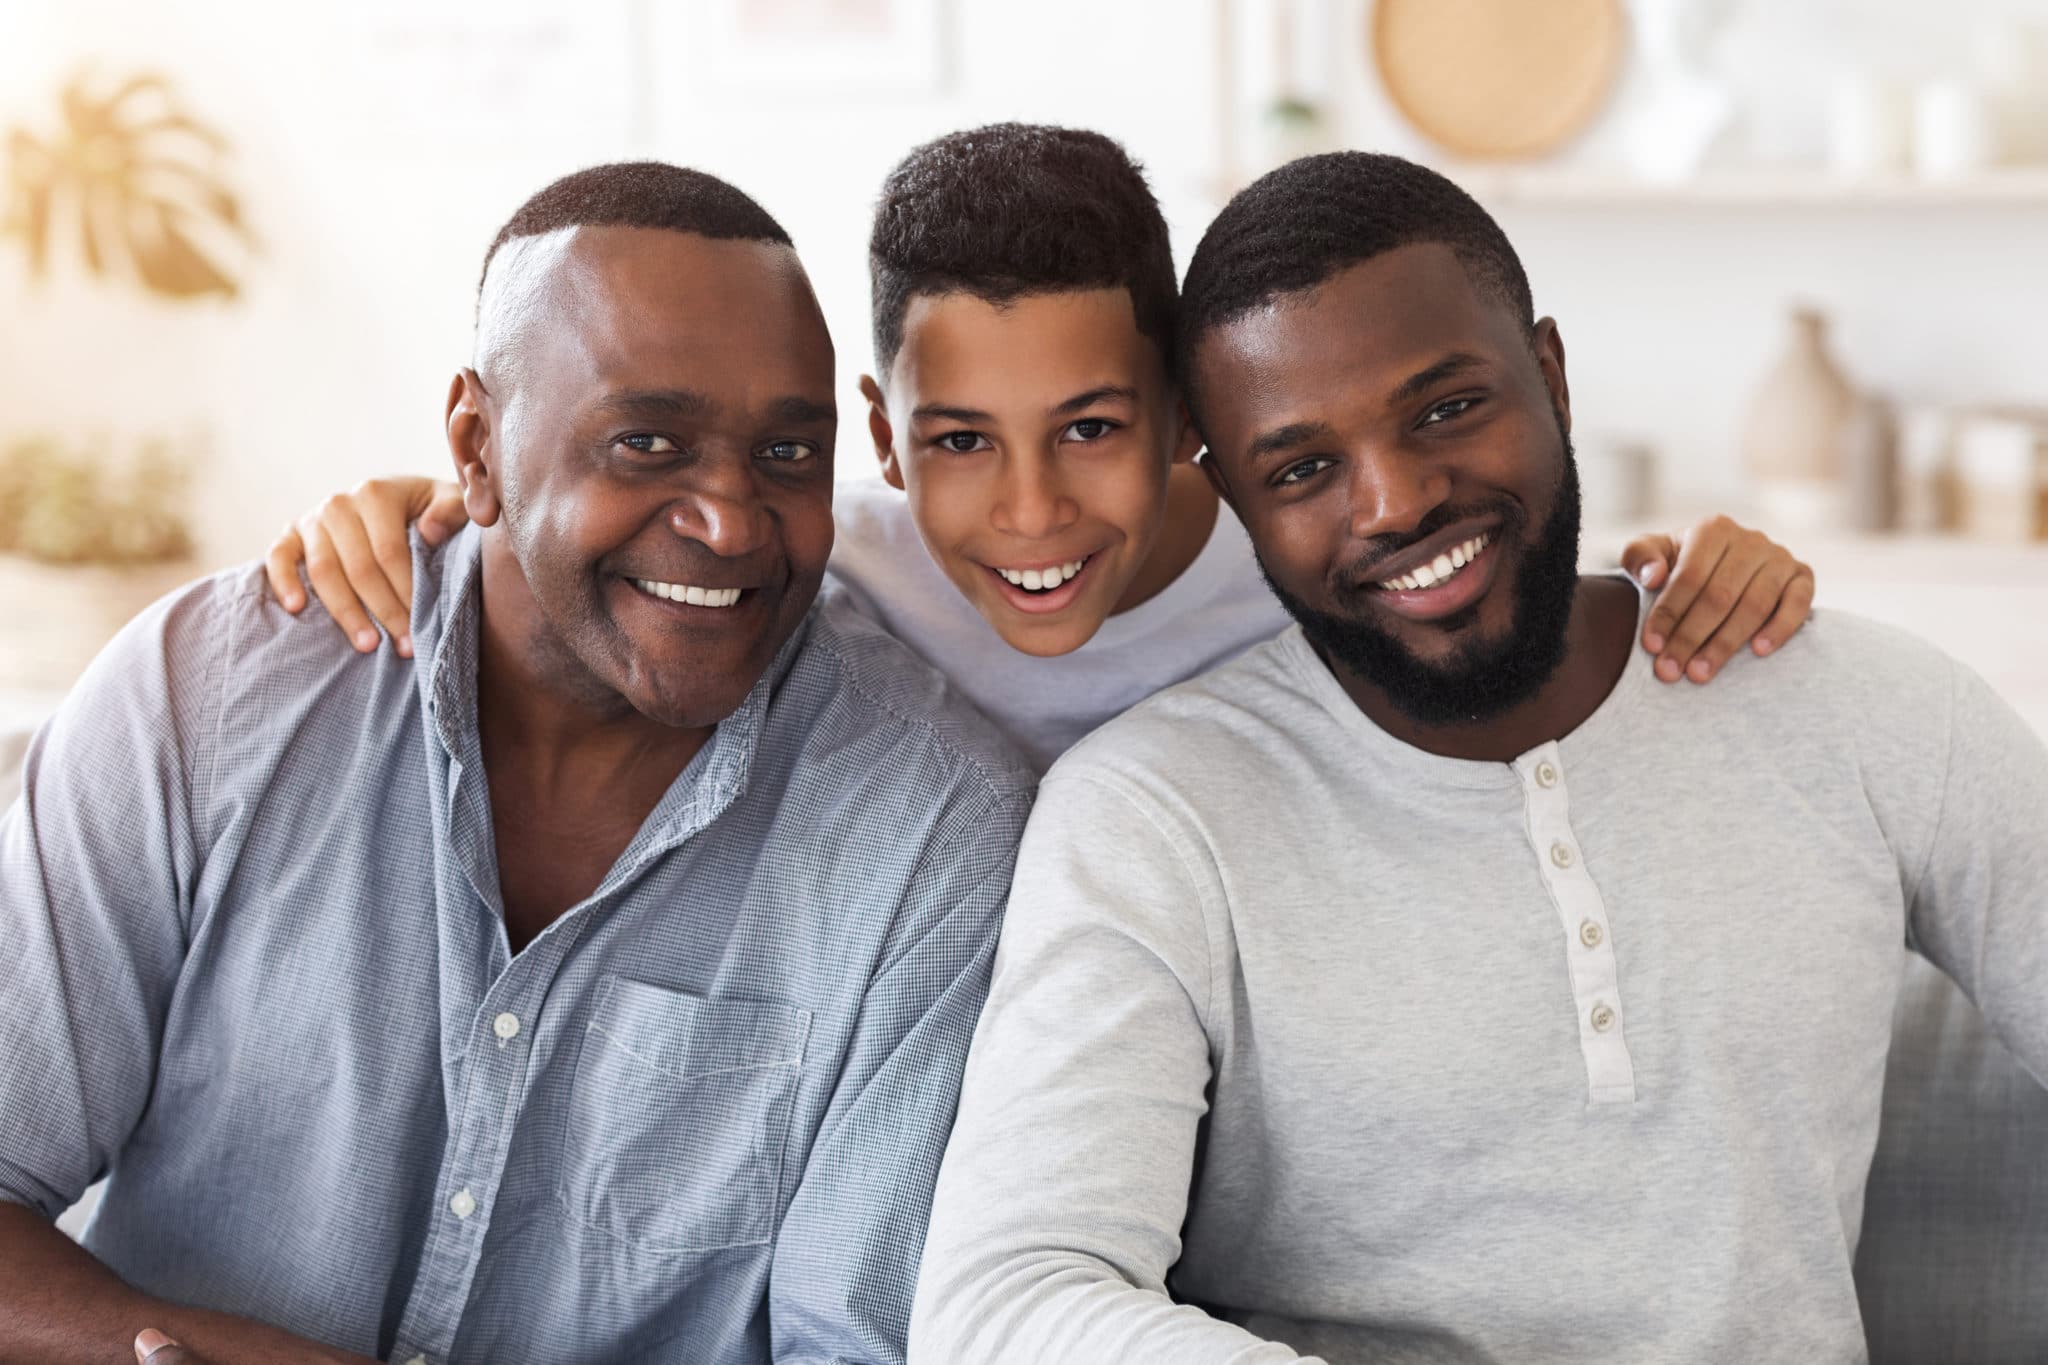 Portrait of joyful black son, dad and grandfather posing for family picture at home together